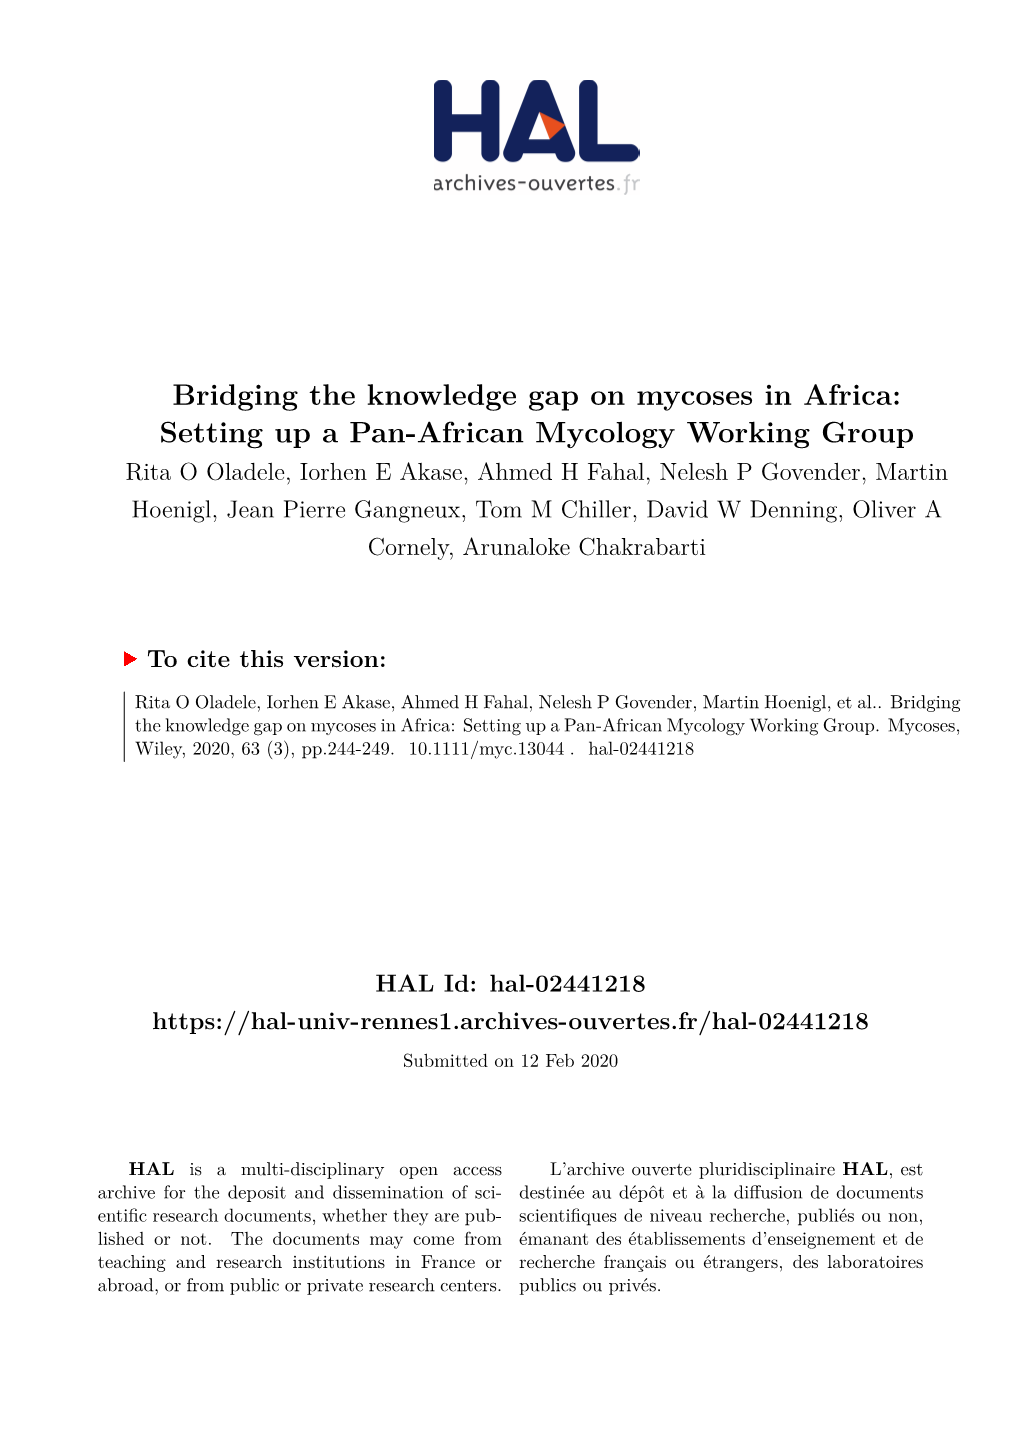 Bridging the Knowledge Gap on Mycoses in Africa: Setting up a Pan